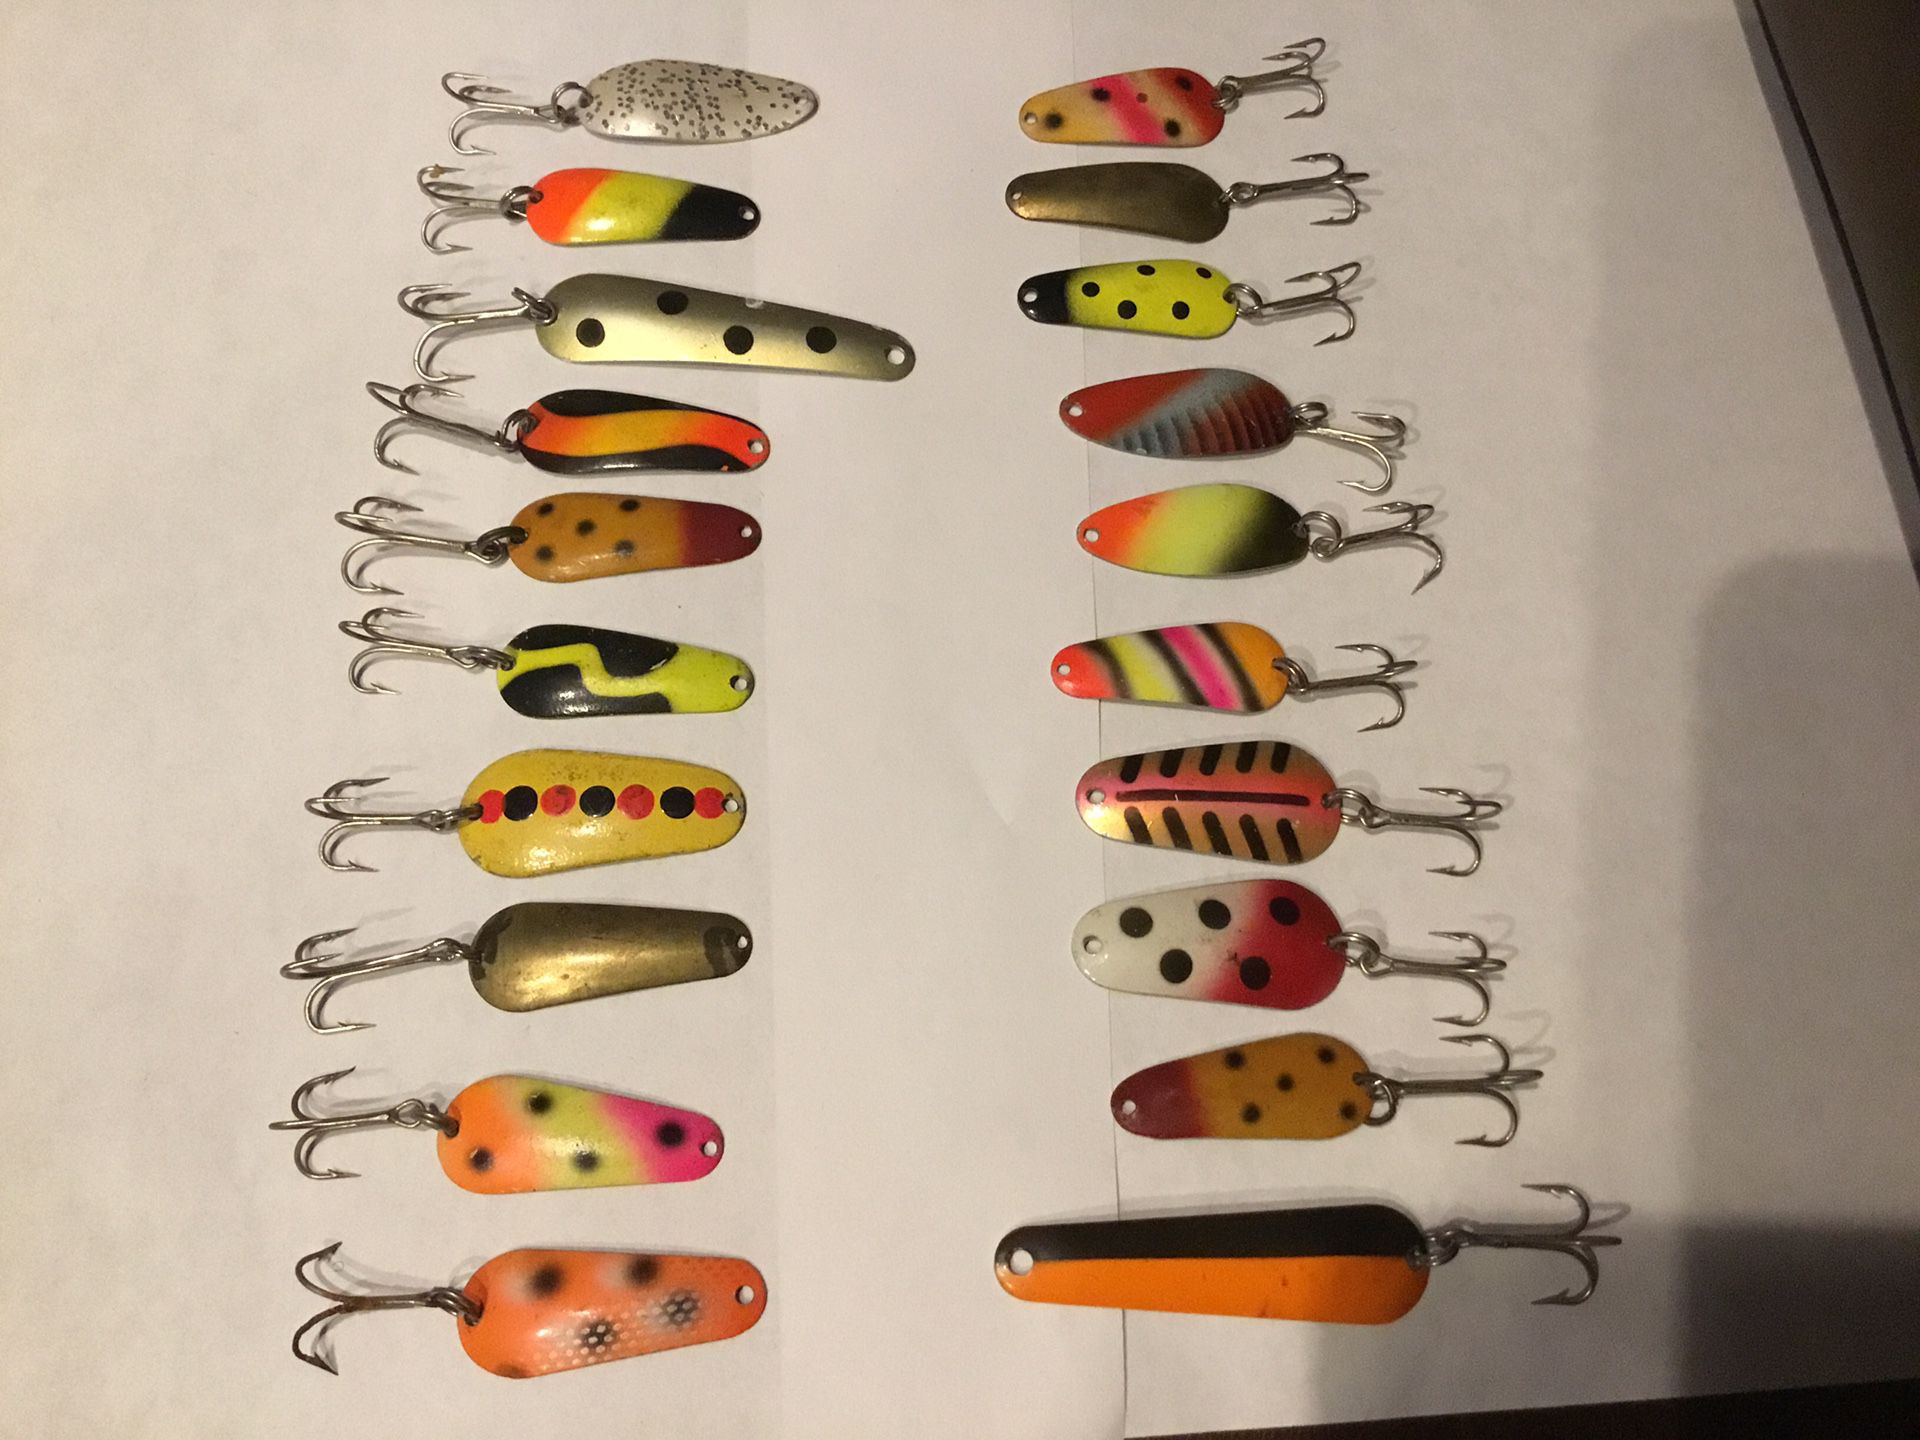 20 assrt shapes and sizes of walleye spoon fishing lures